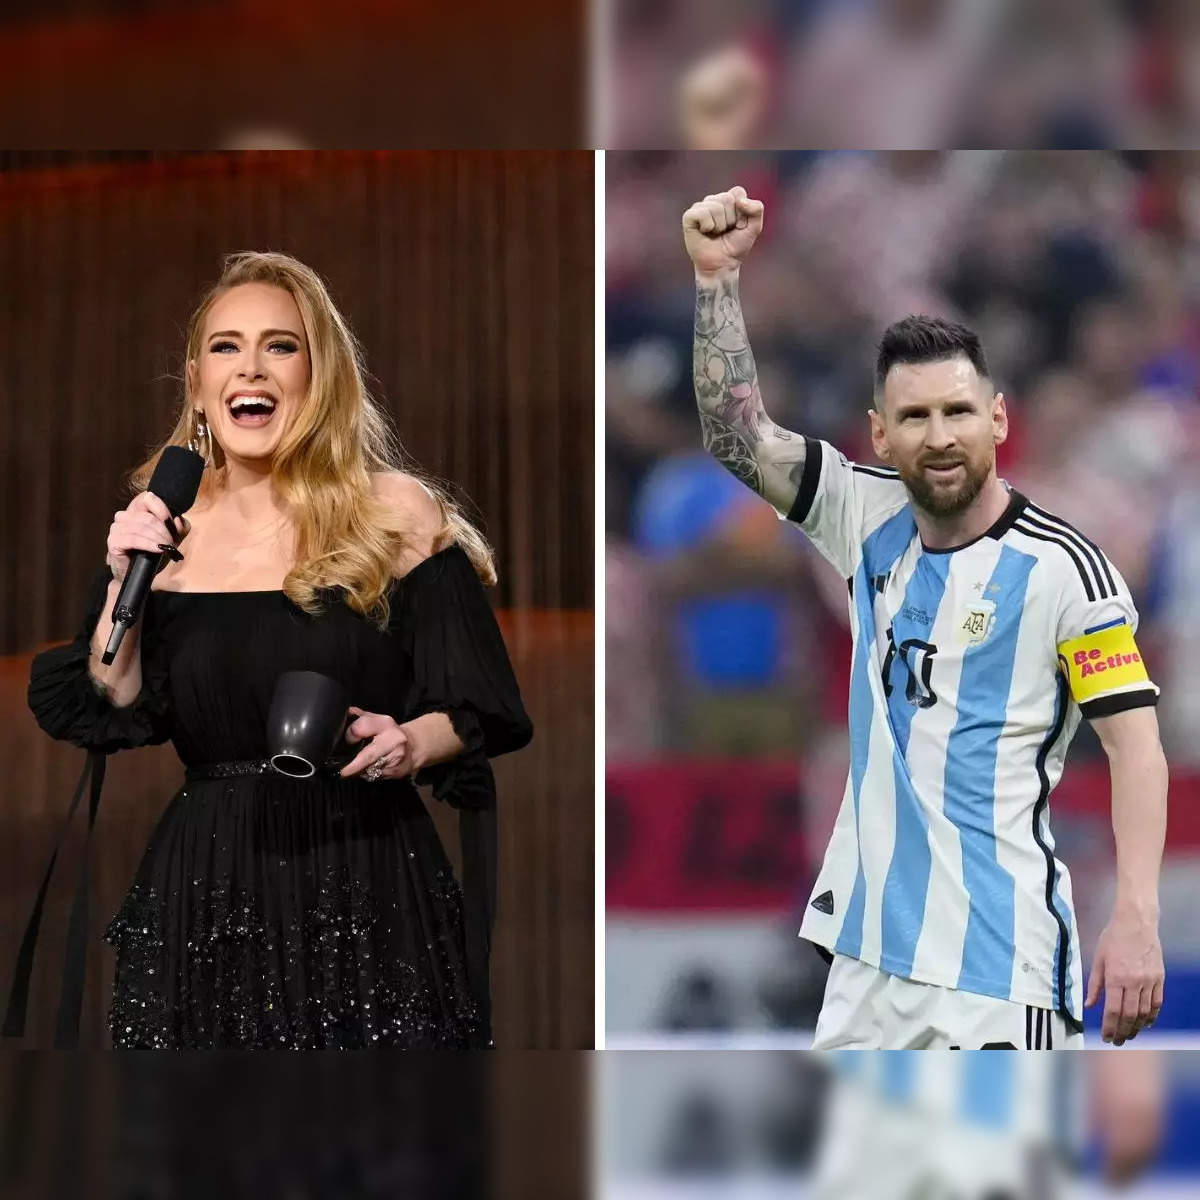 This Fan-made Clip Shows Football Legends Messi And Ronaldo